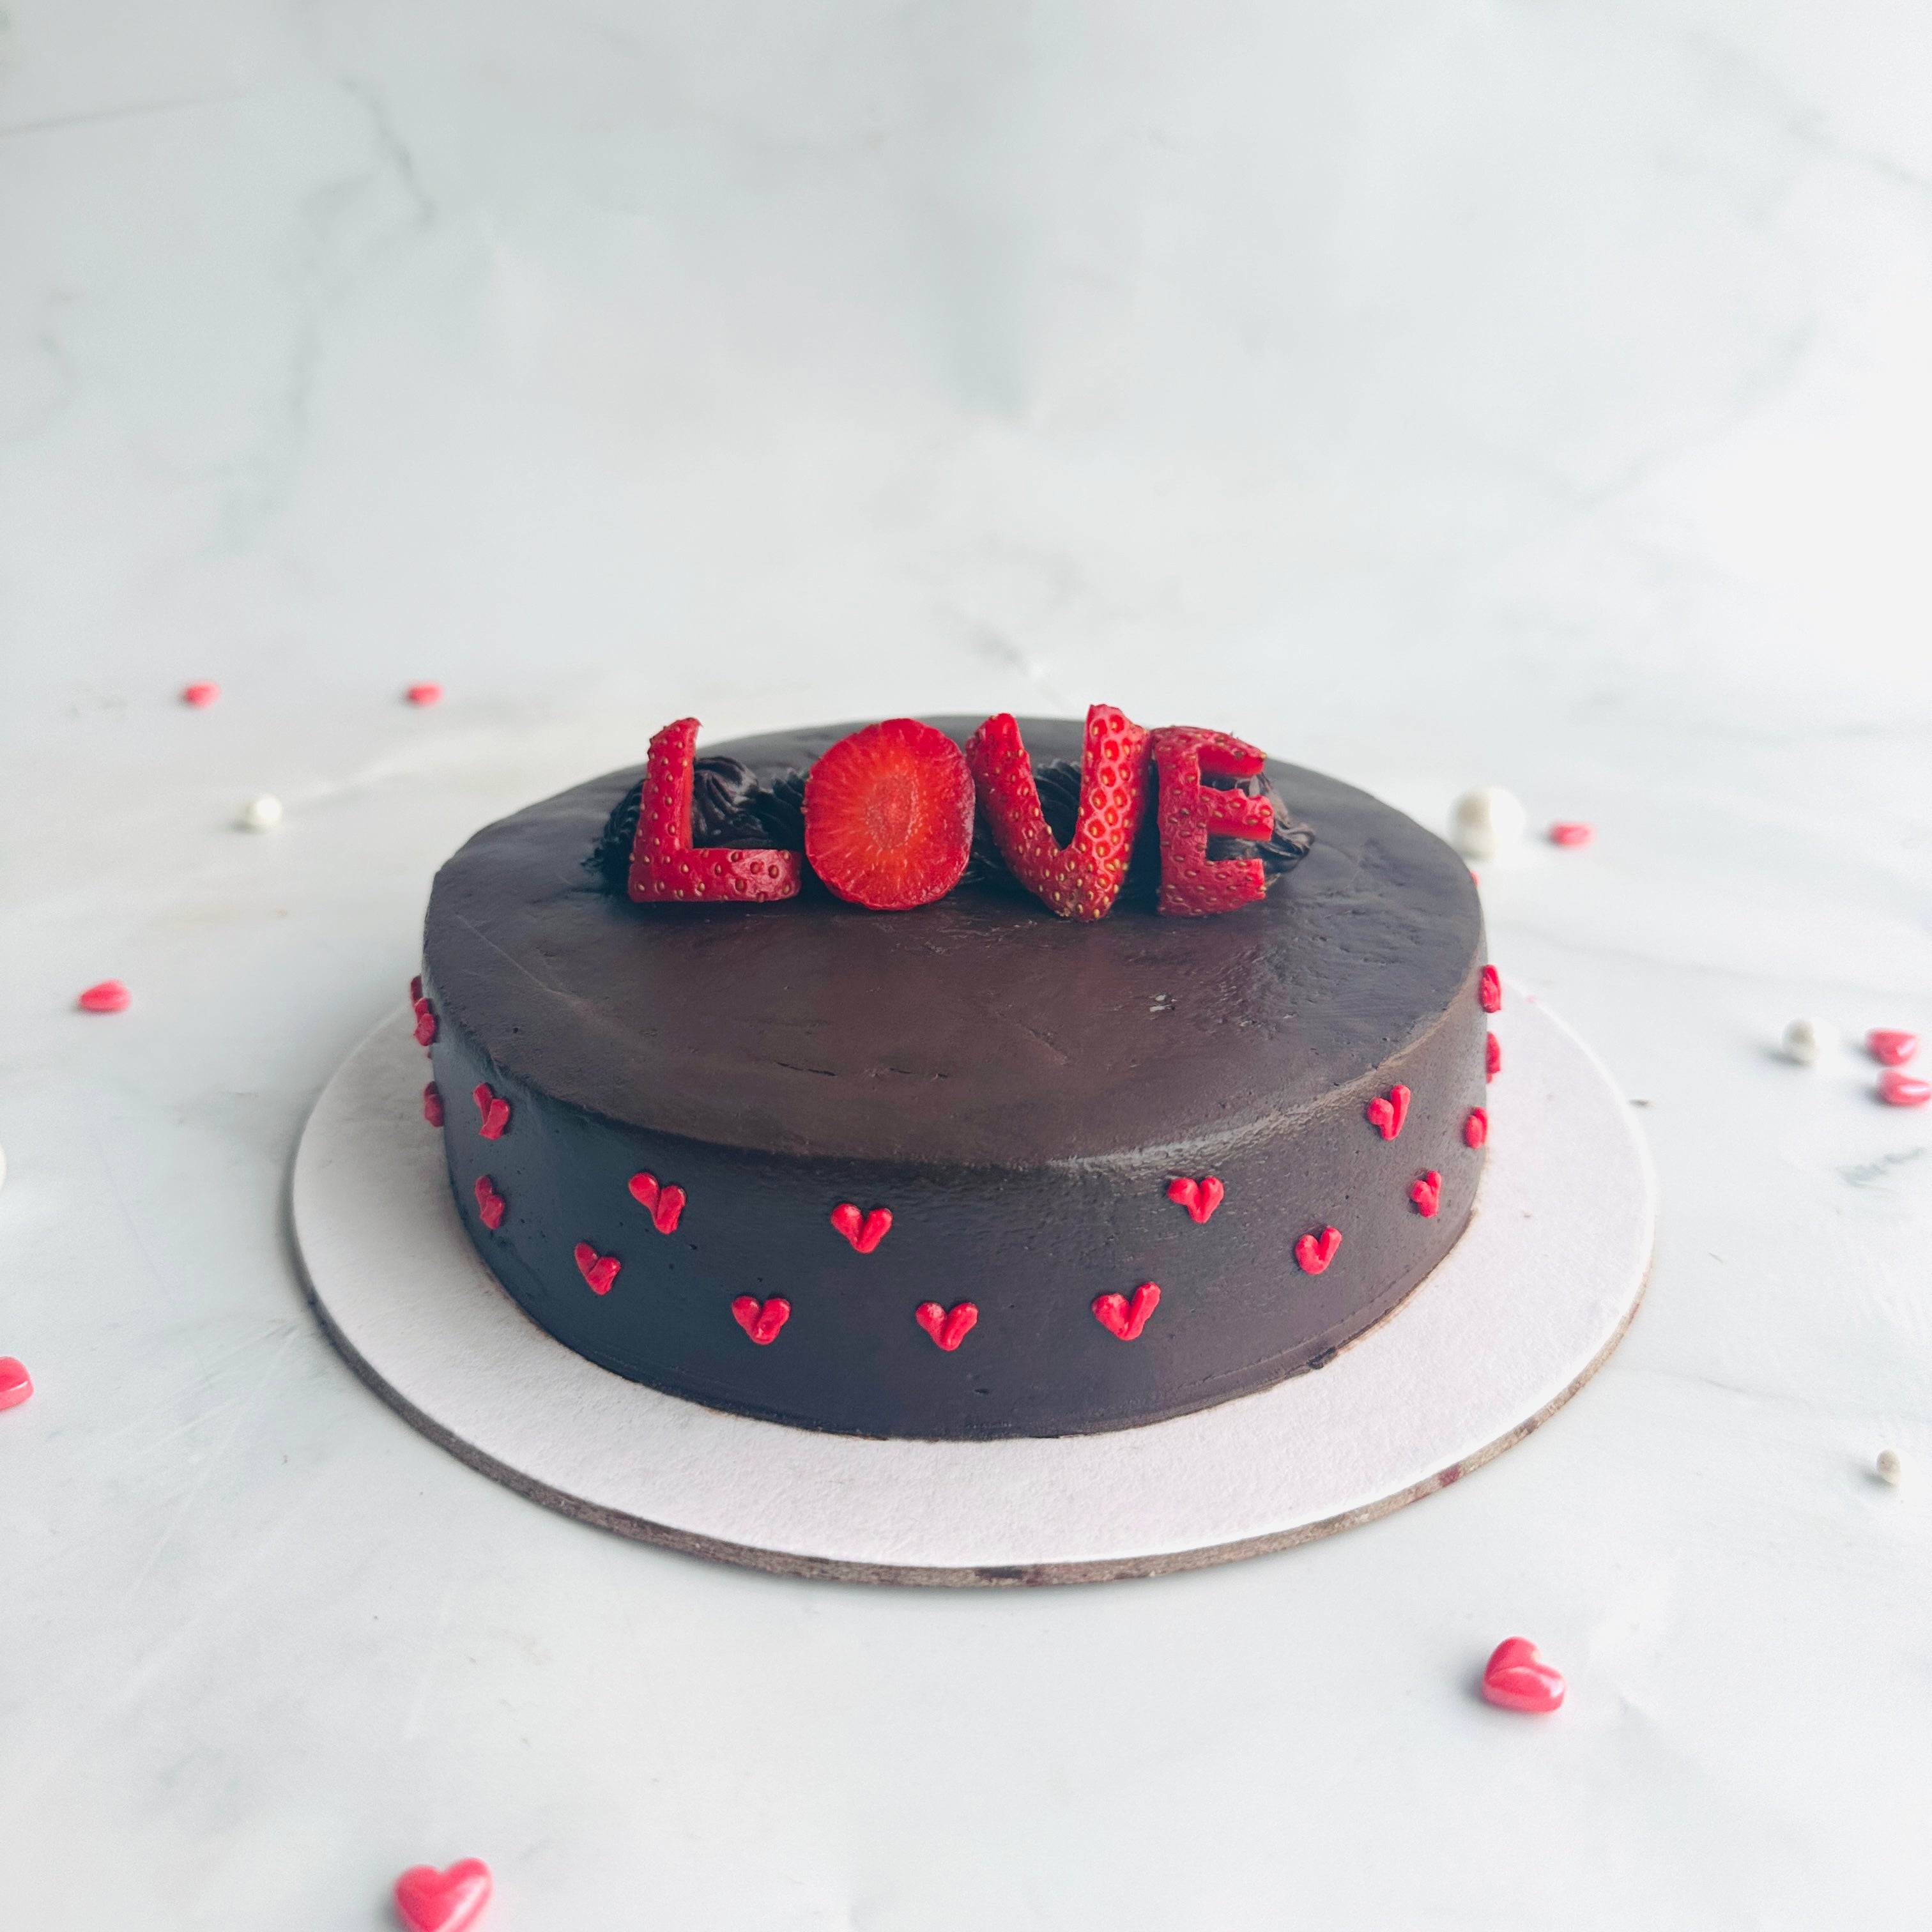 Chef Special Belgian Chocolate Cake – Order Online Cake: Chandigarh,  Panchkula, Mohali Delivery | Birthday Cakes | Kids Cakes | Fruits Cake |  Premium Cakes